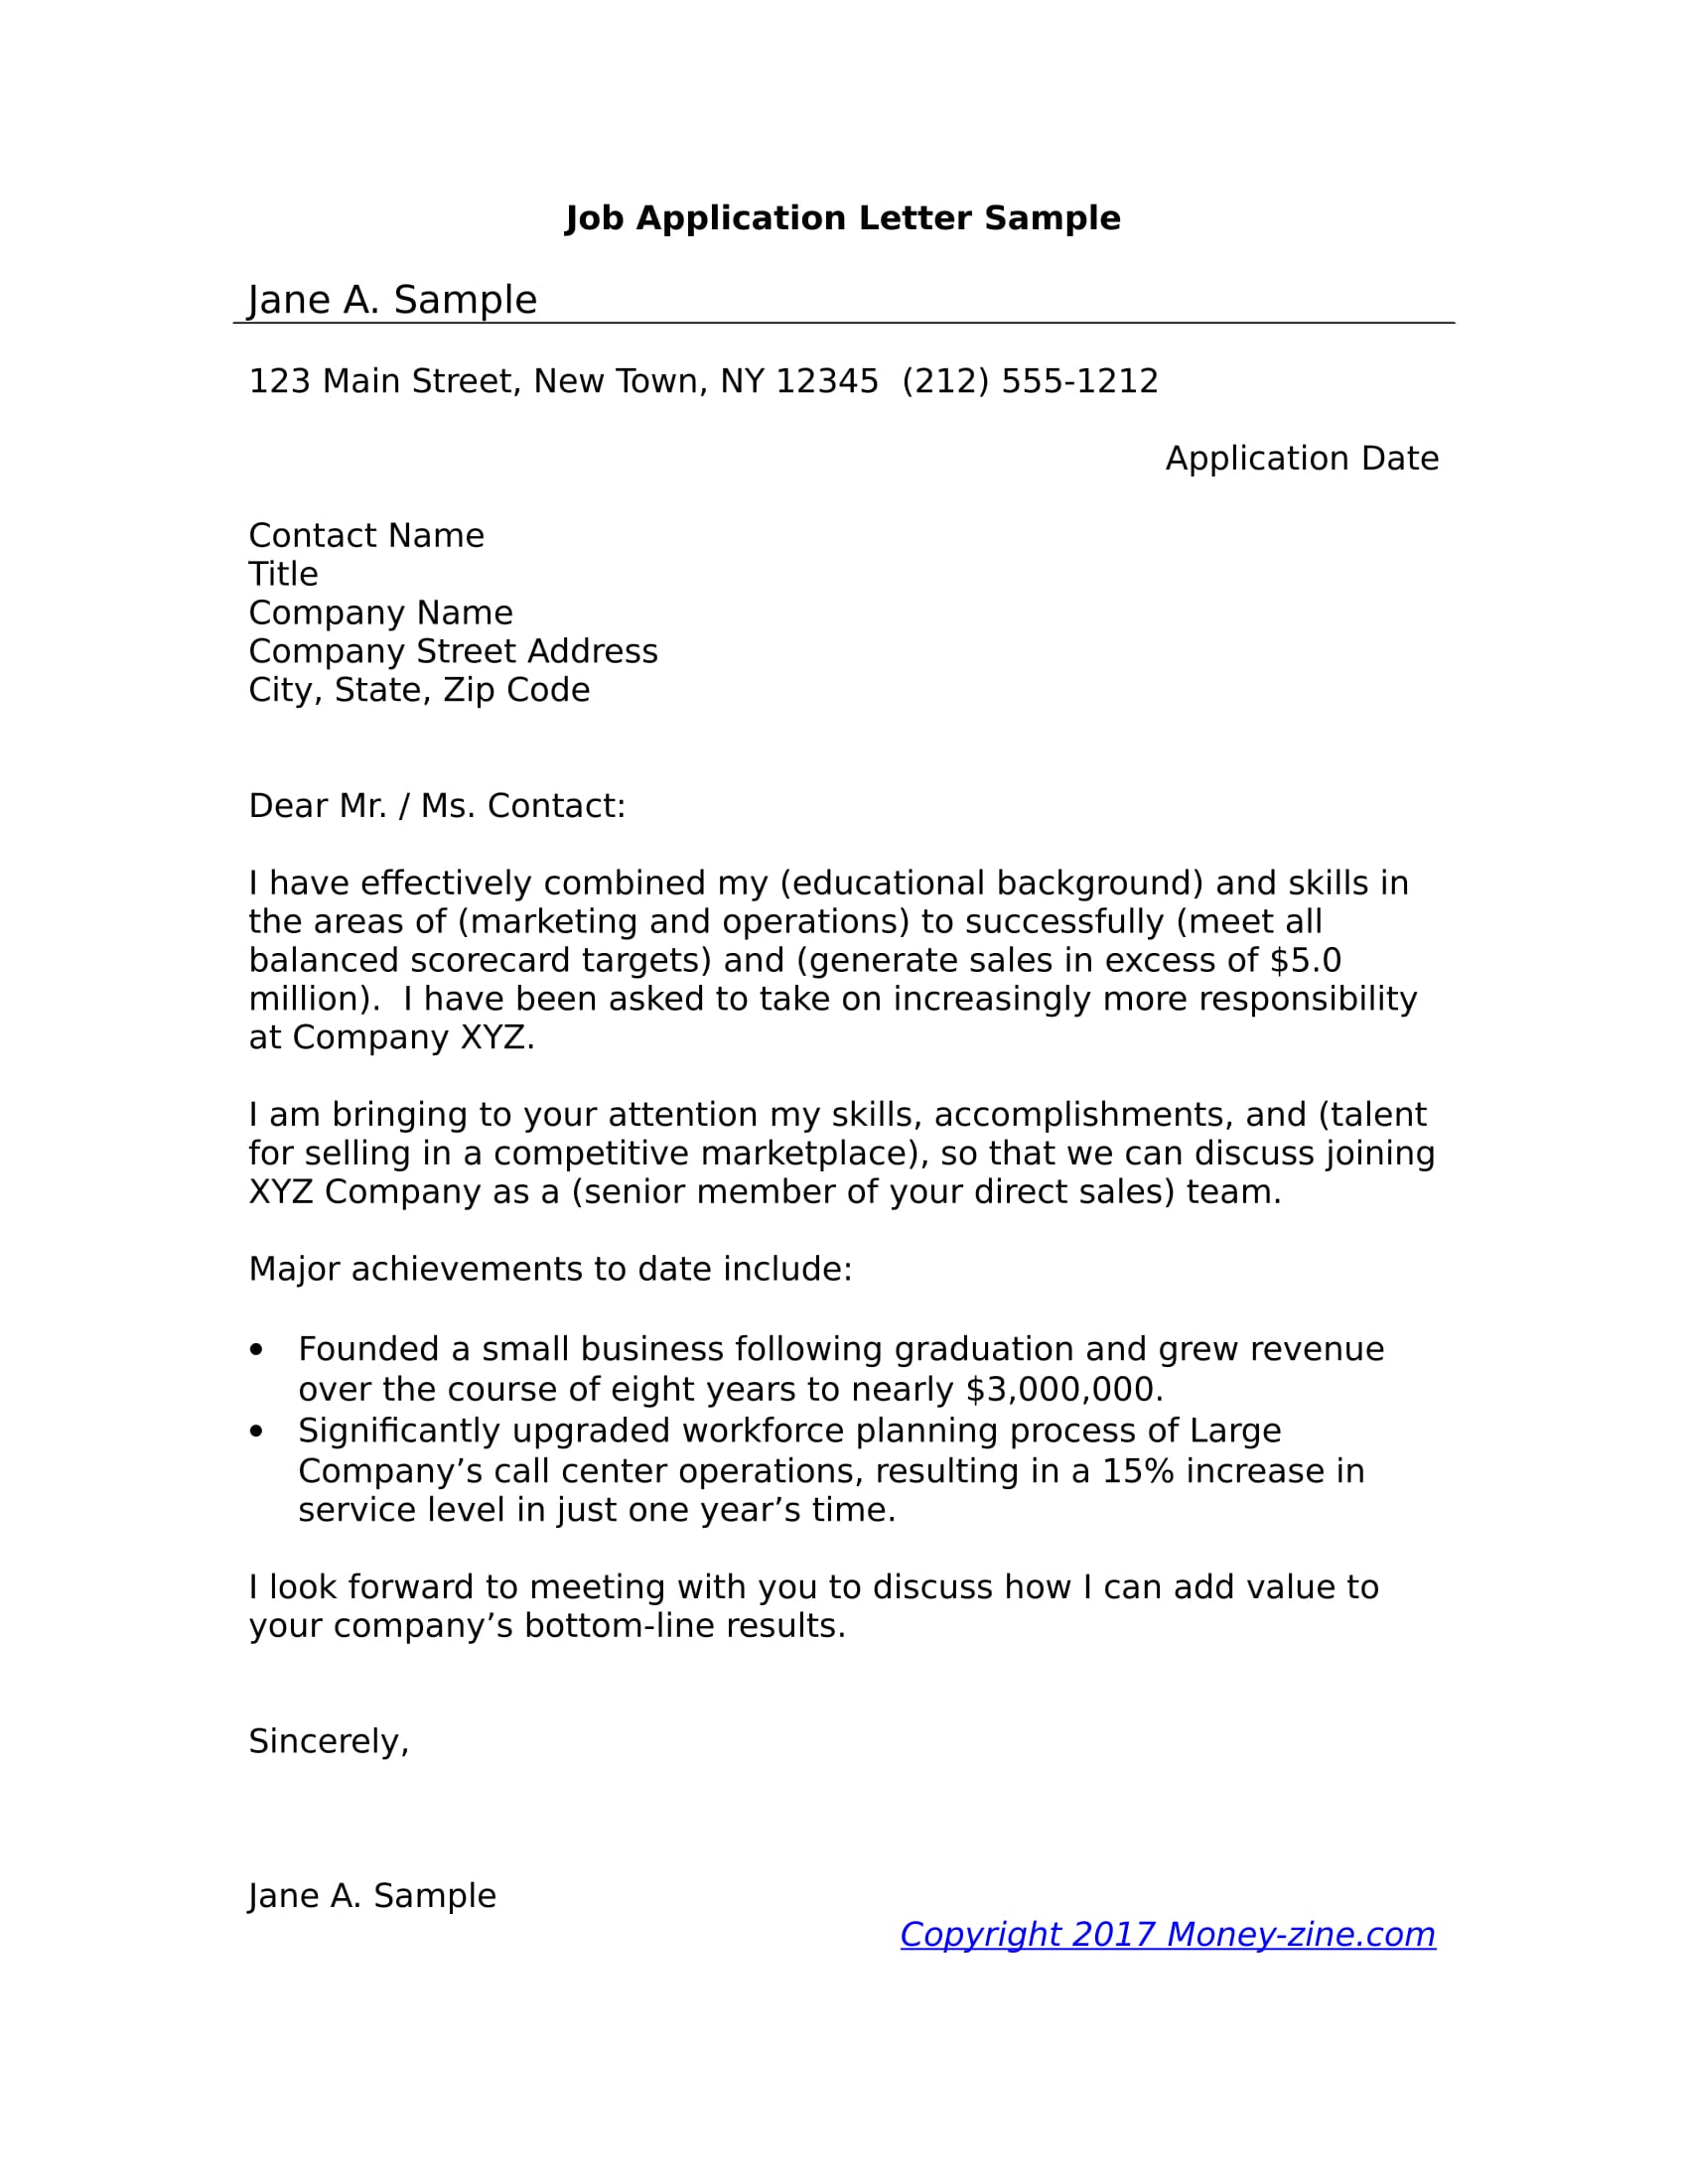 example of application letters for job